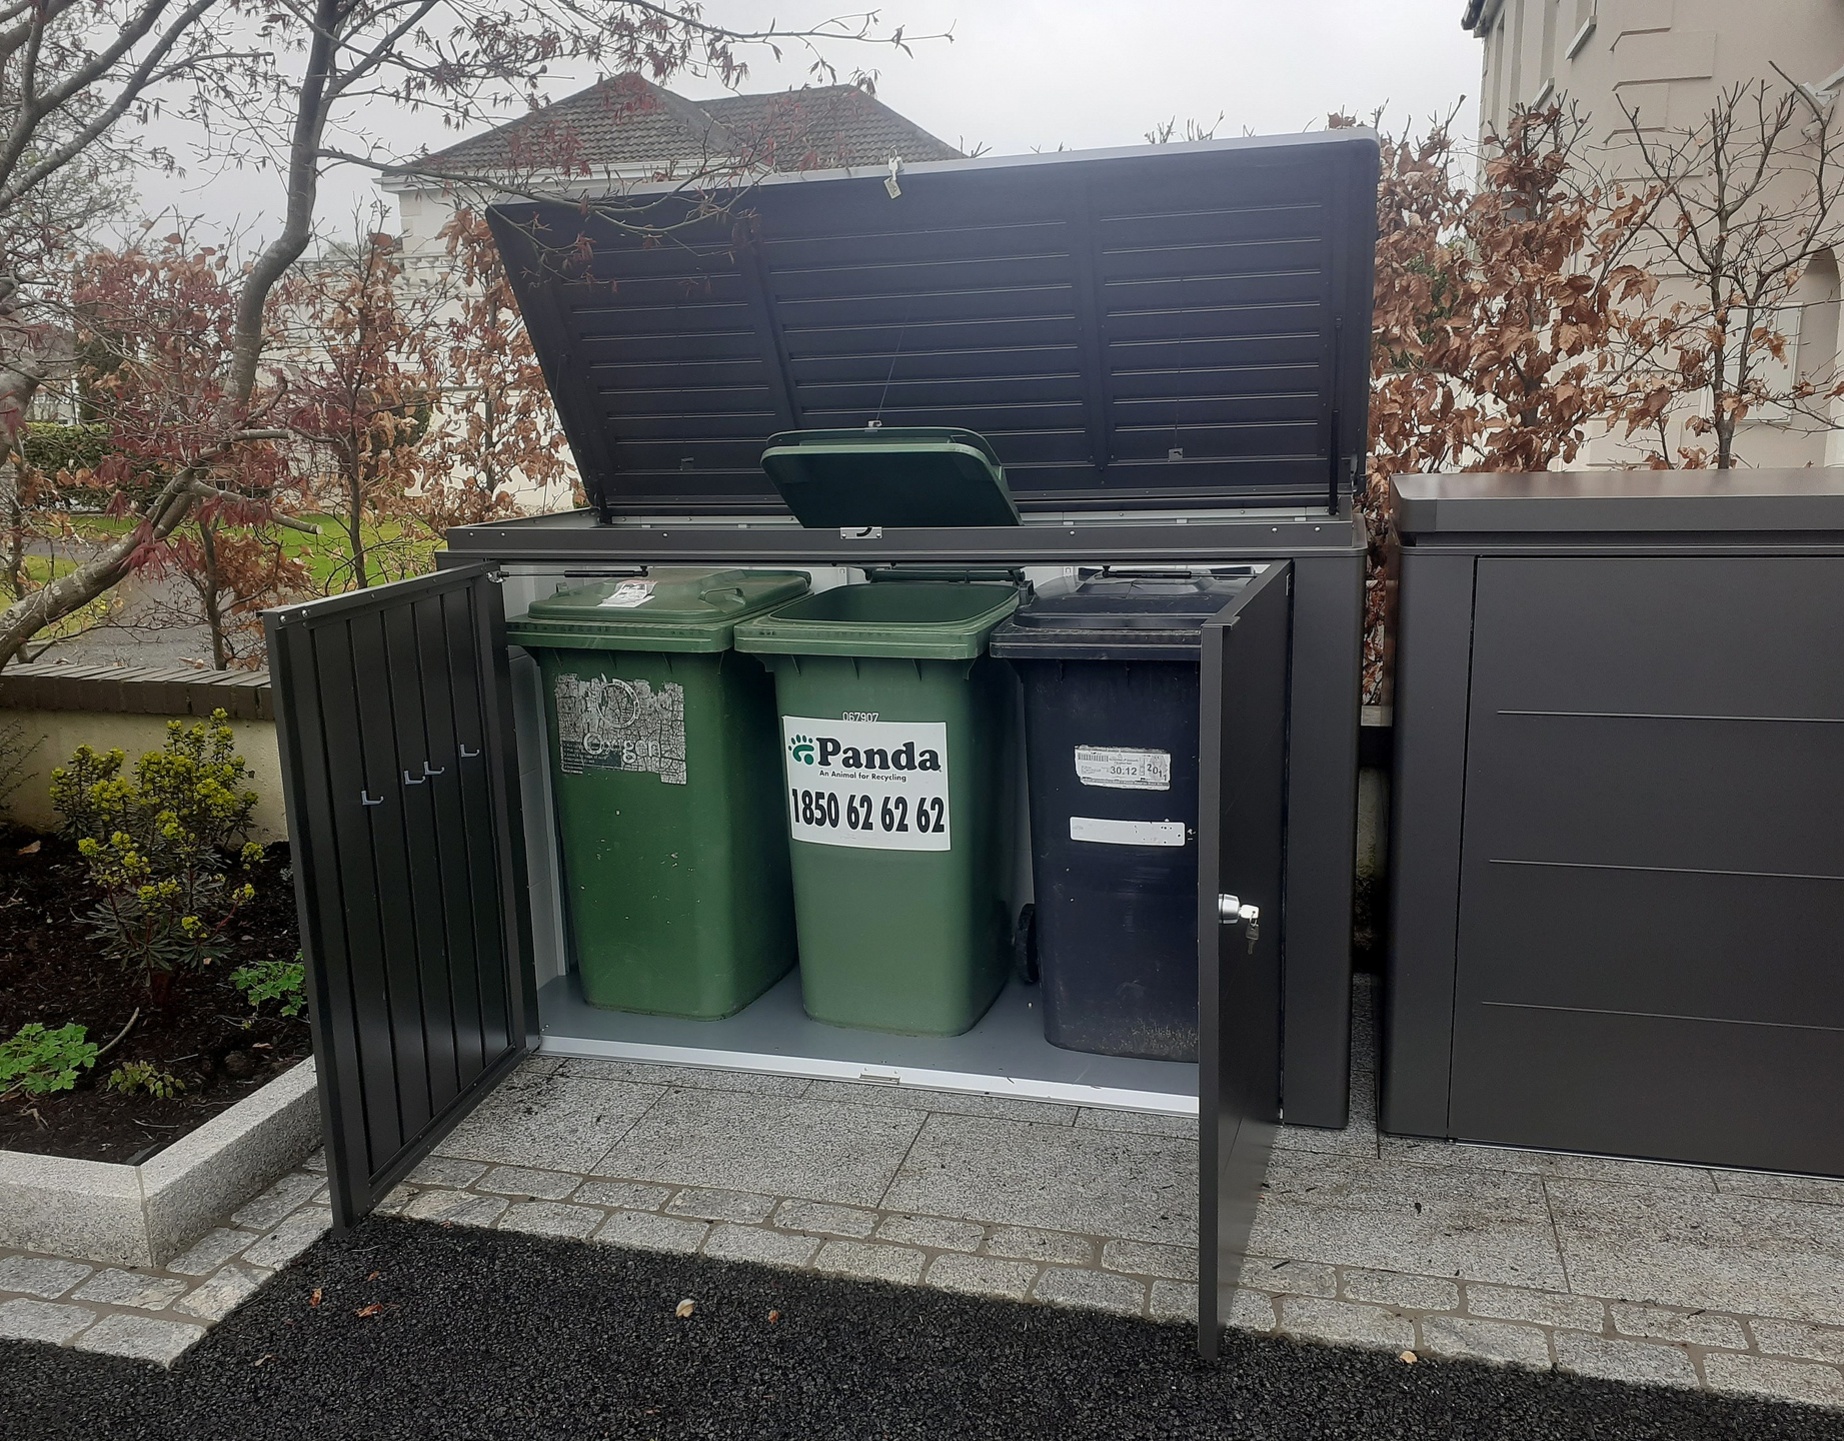 Biohort HighBoard 200 Storage Unit - a stylish & secure storage solution for Bins, Bikes etc  | Supplied + Fitted in Castleknock, Dublin 15 by Owen Chubb Landscapers.